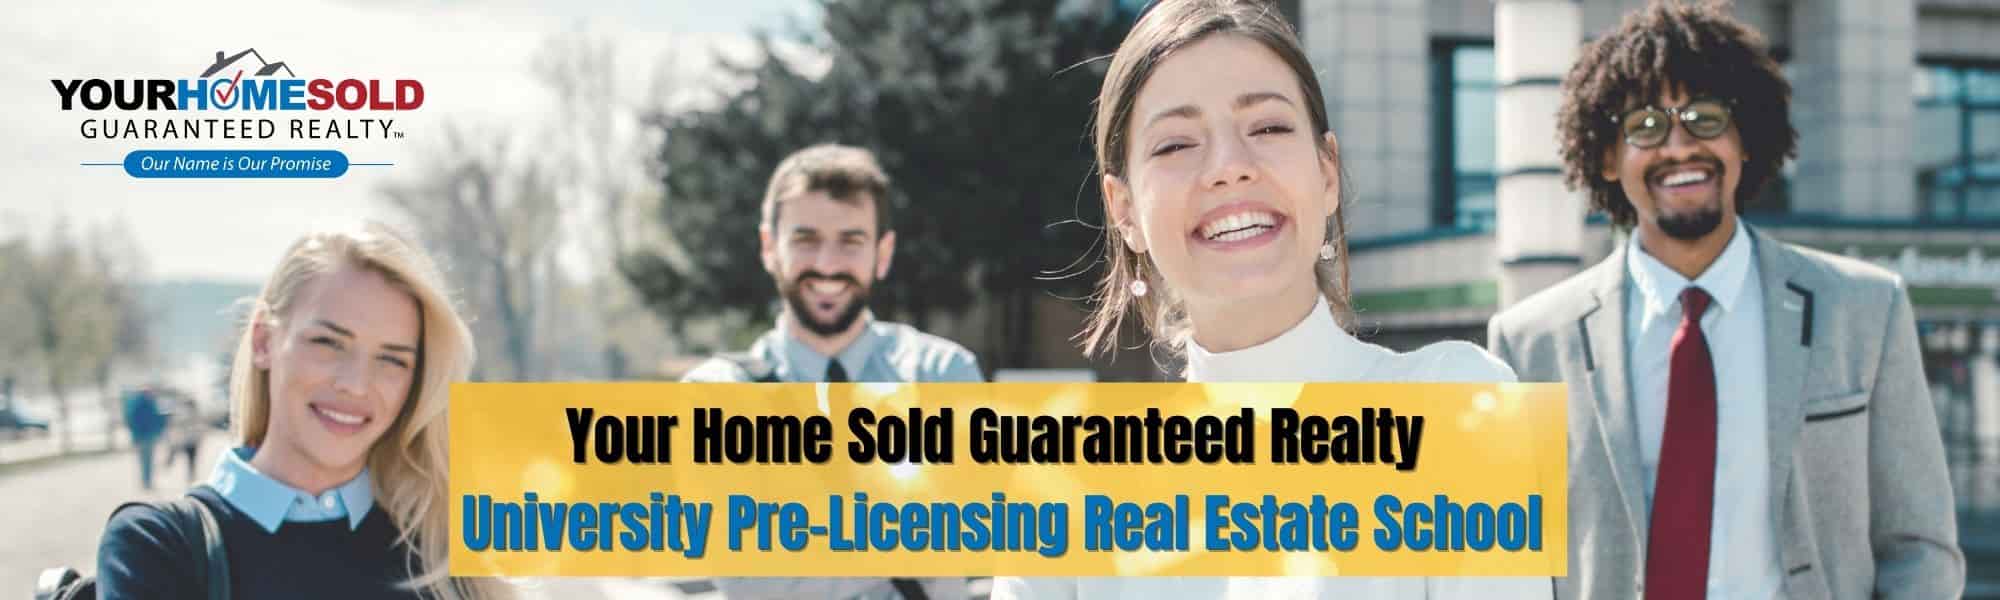 Thriving Real Estate Career Is Assured with Your Home Sold Guaranteed Realty University Pre-Licensing Real Estate School